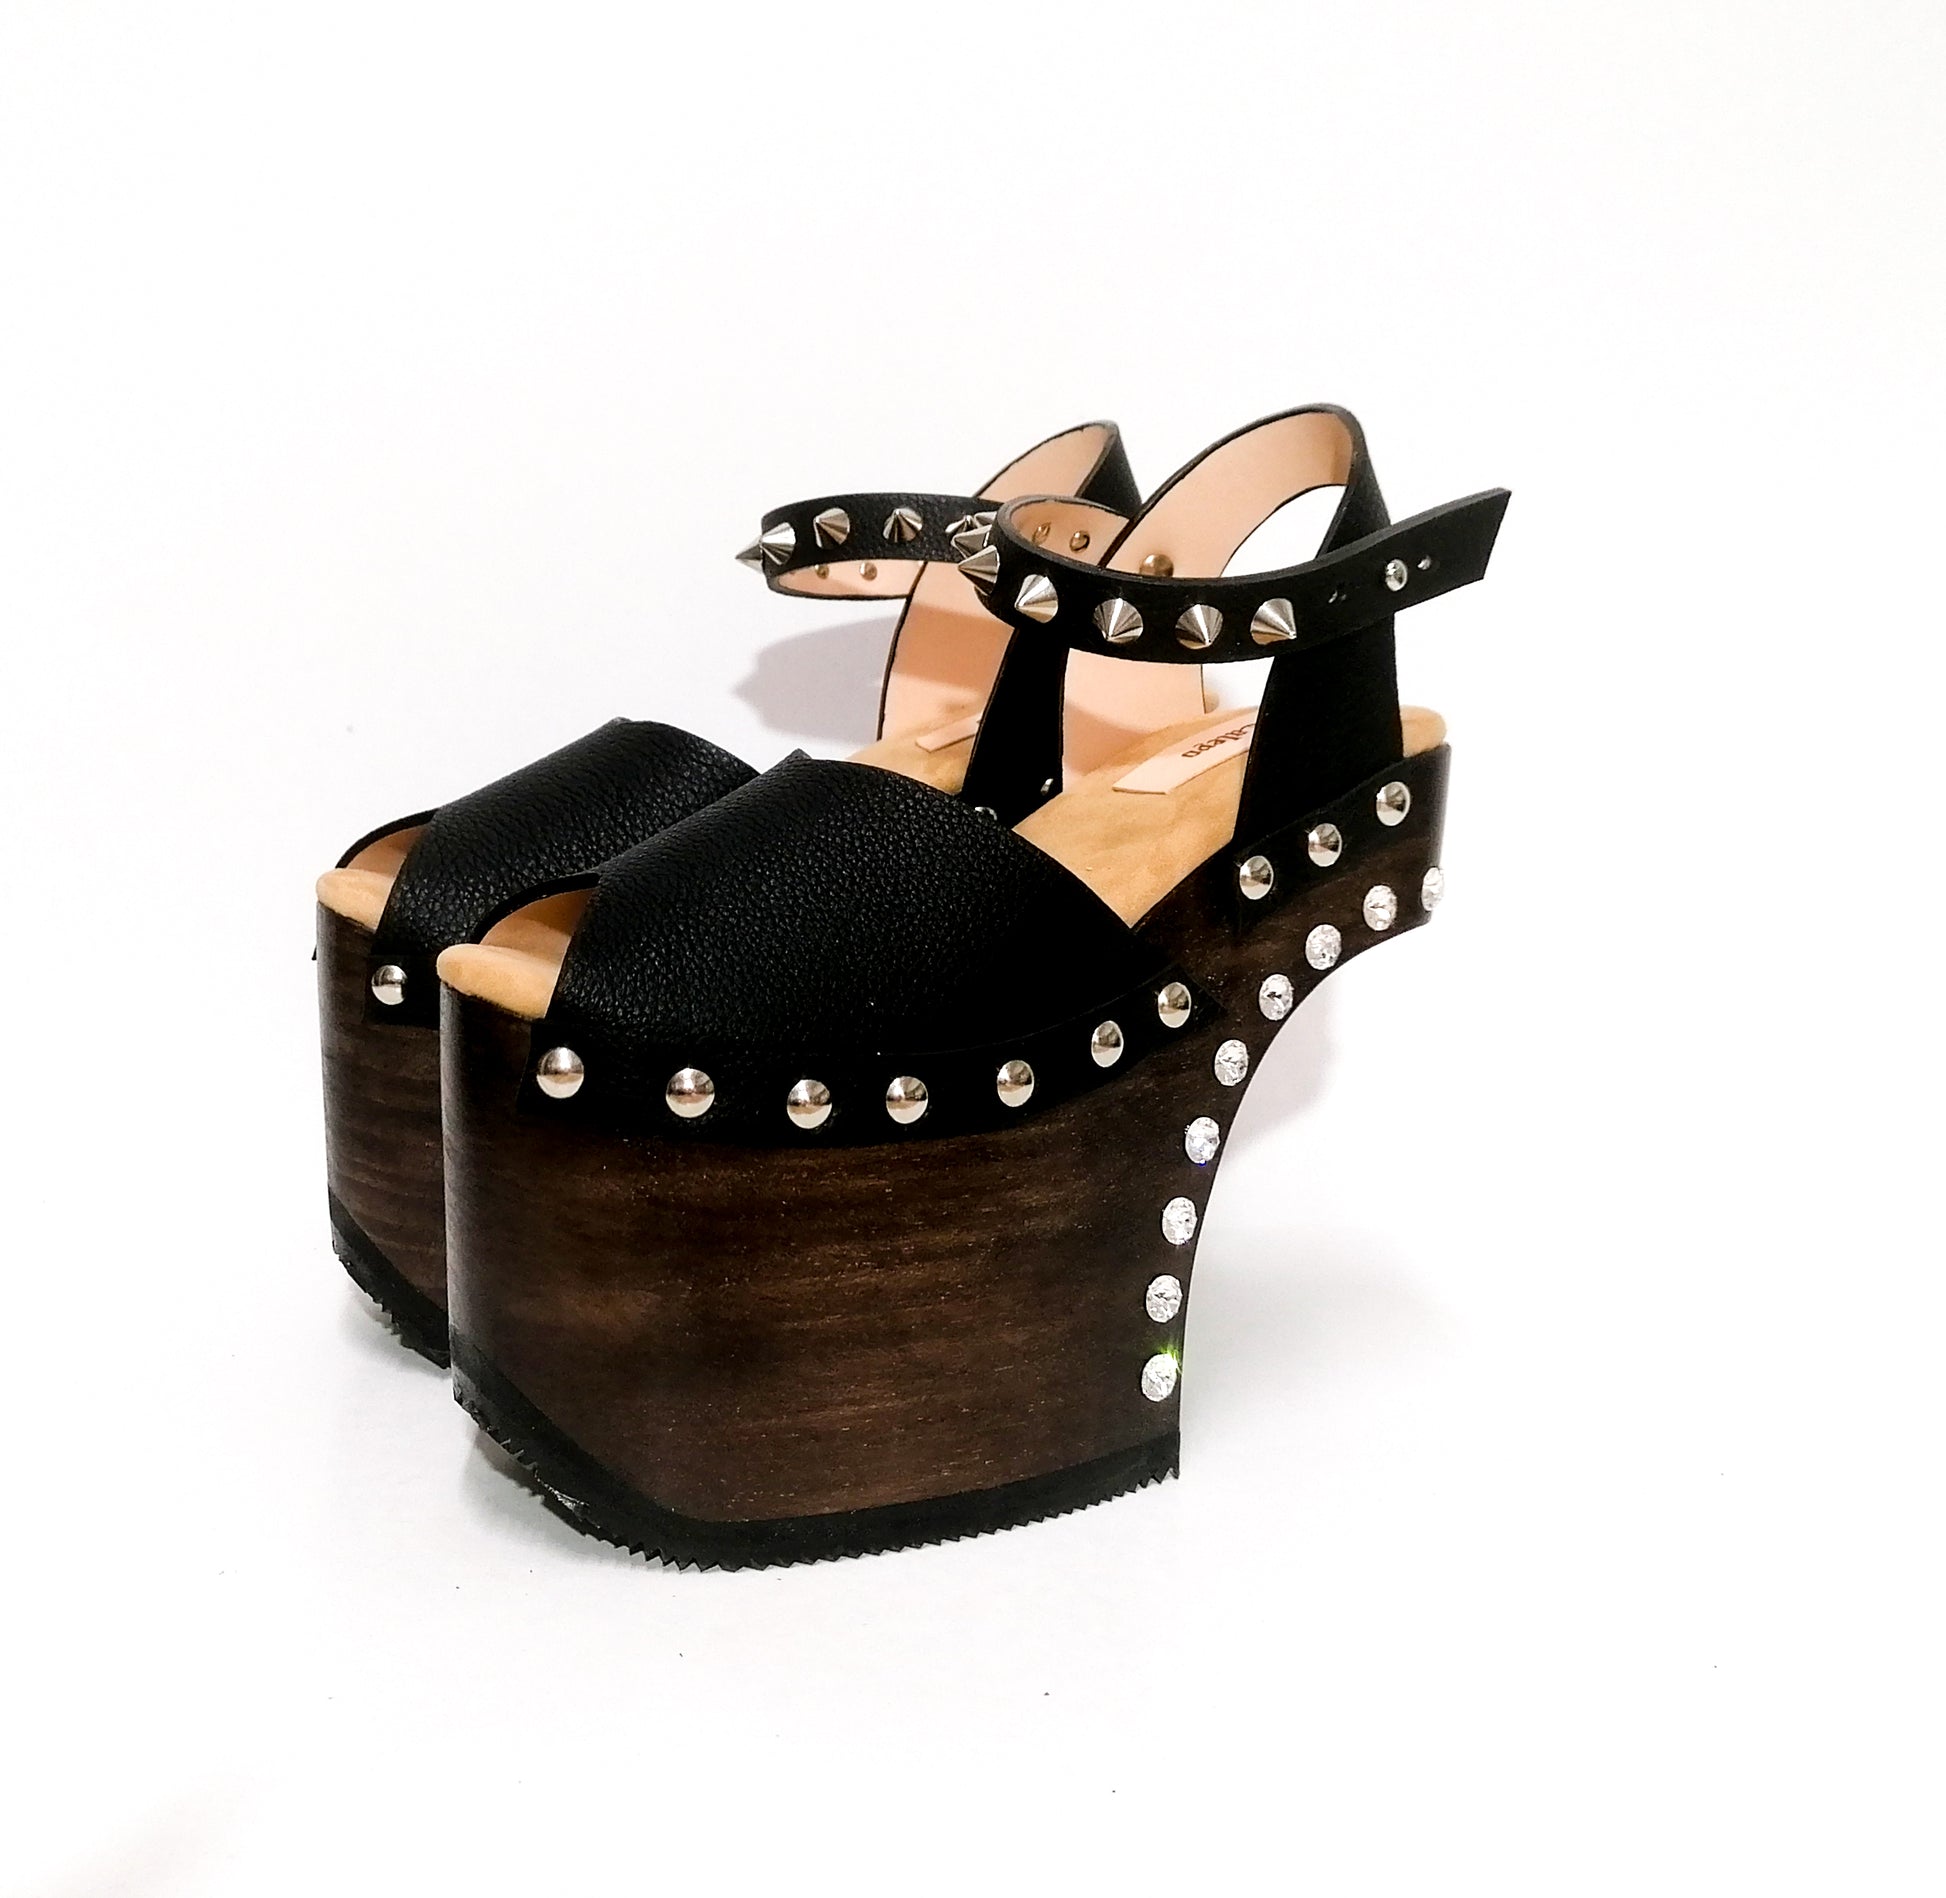 Black leather platform sandal with silver studs. Wooden wedge heel in C decorated with swarovski crystals. Super high heel sandal with genuine swarovski crystals. Super high heel sandal without heel. Sizes 34 to 47. High quality leather shoes handmade by sol Caleyo. Sustainable fashion.